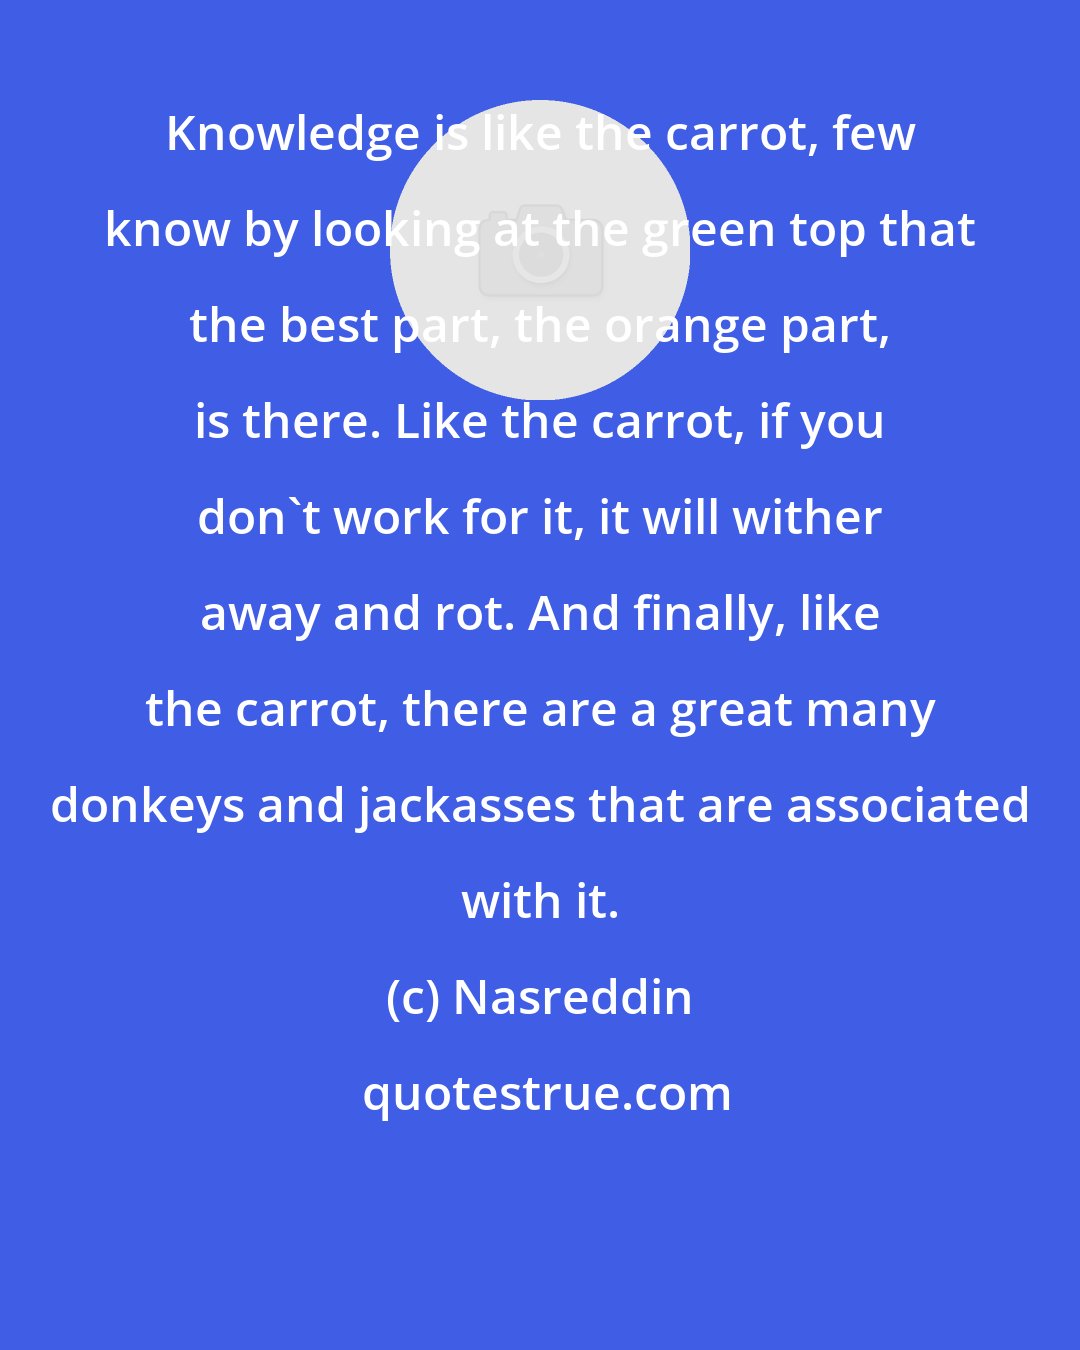 Nasreddin: Knowledge is like the carrot, few know by looking at the green top that the best part, the orange part, is there. Like the carrot, if you don't work for it, it will wither away and rot. And finally, like the carrot, there are a great many donkeys and jackasses that are associated with it.